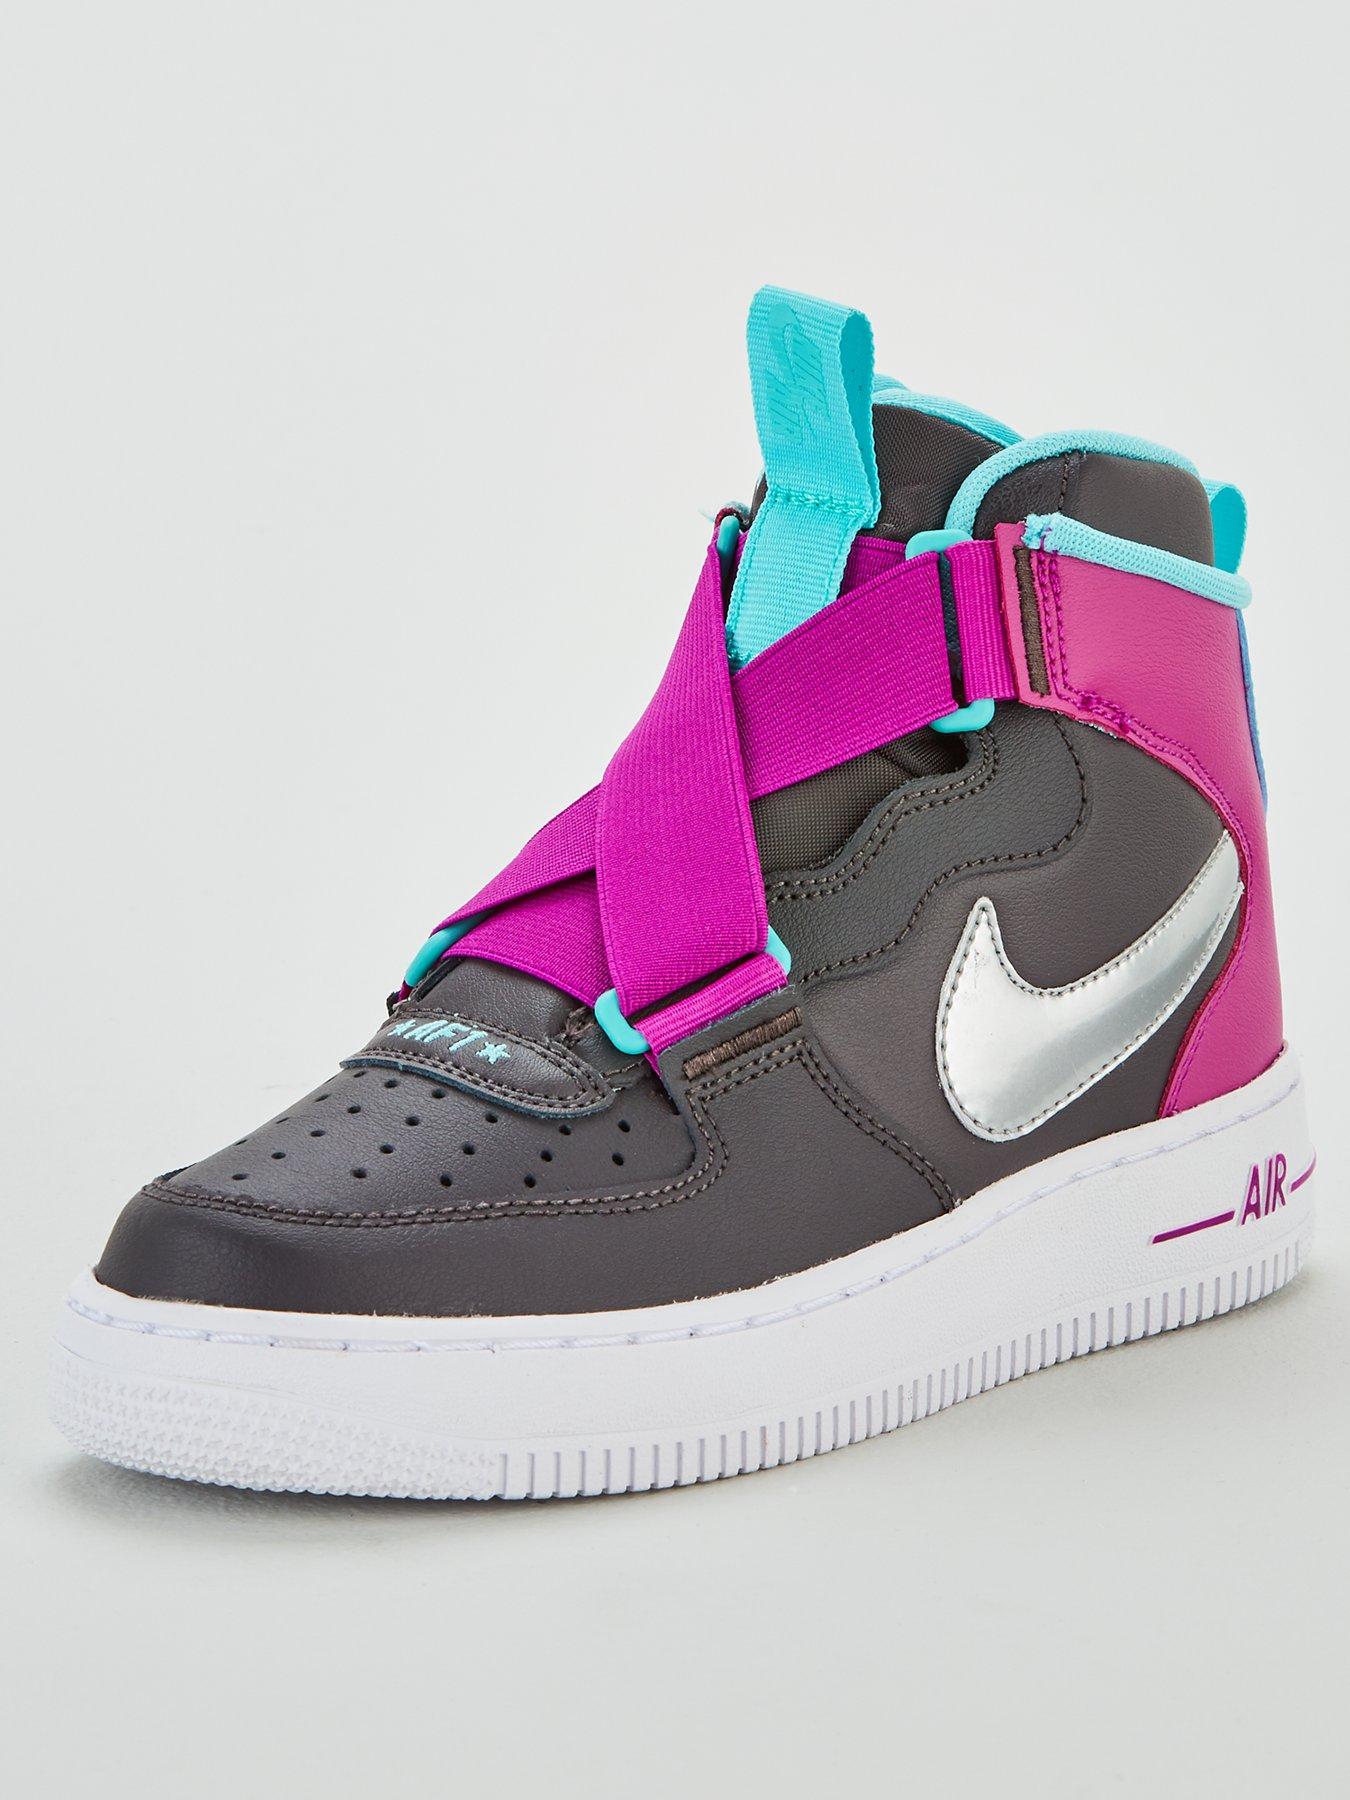 sports direct nike air force 1 junior